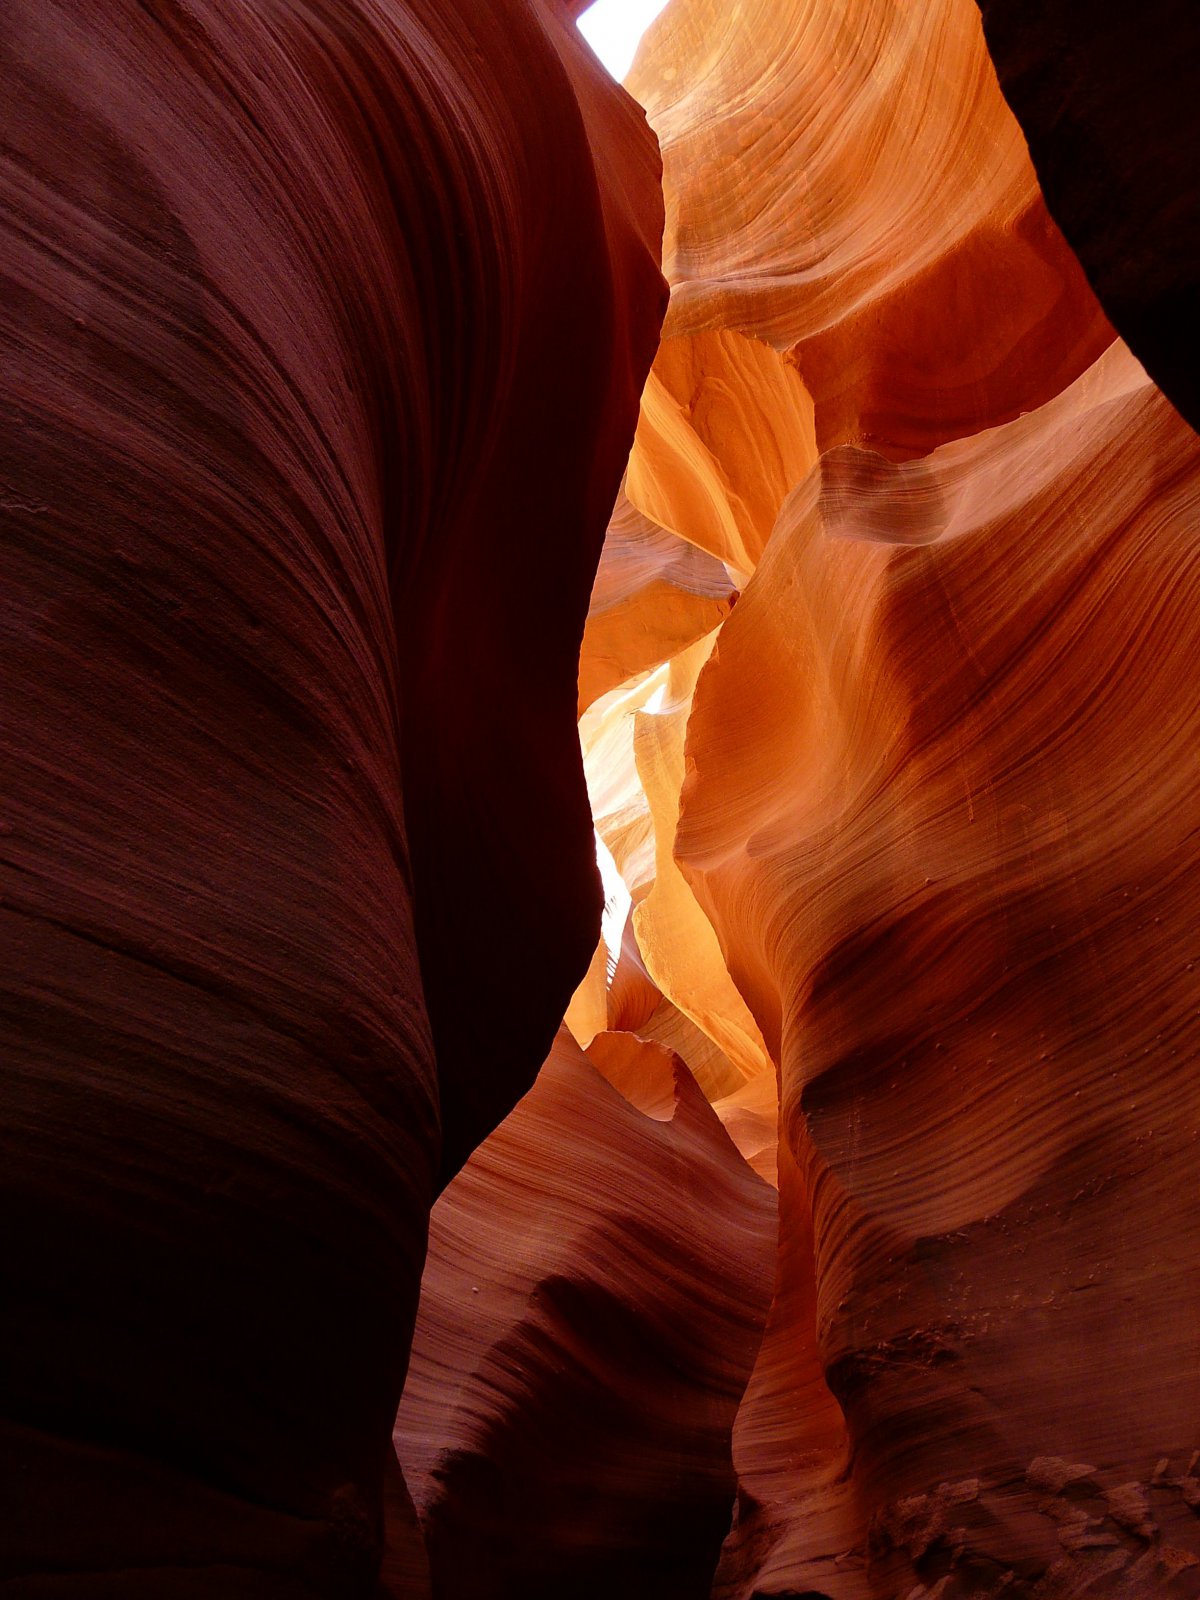 Antelope Canyon pictures in the United States